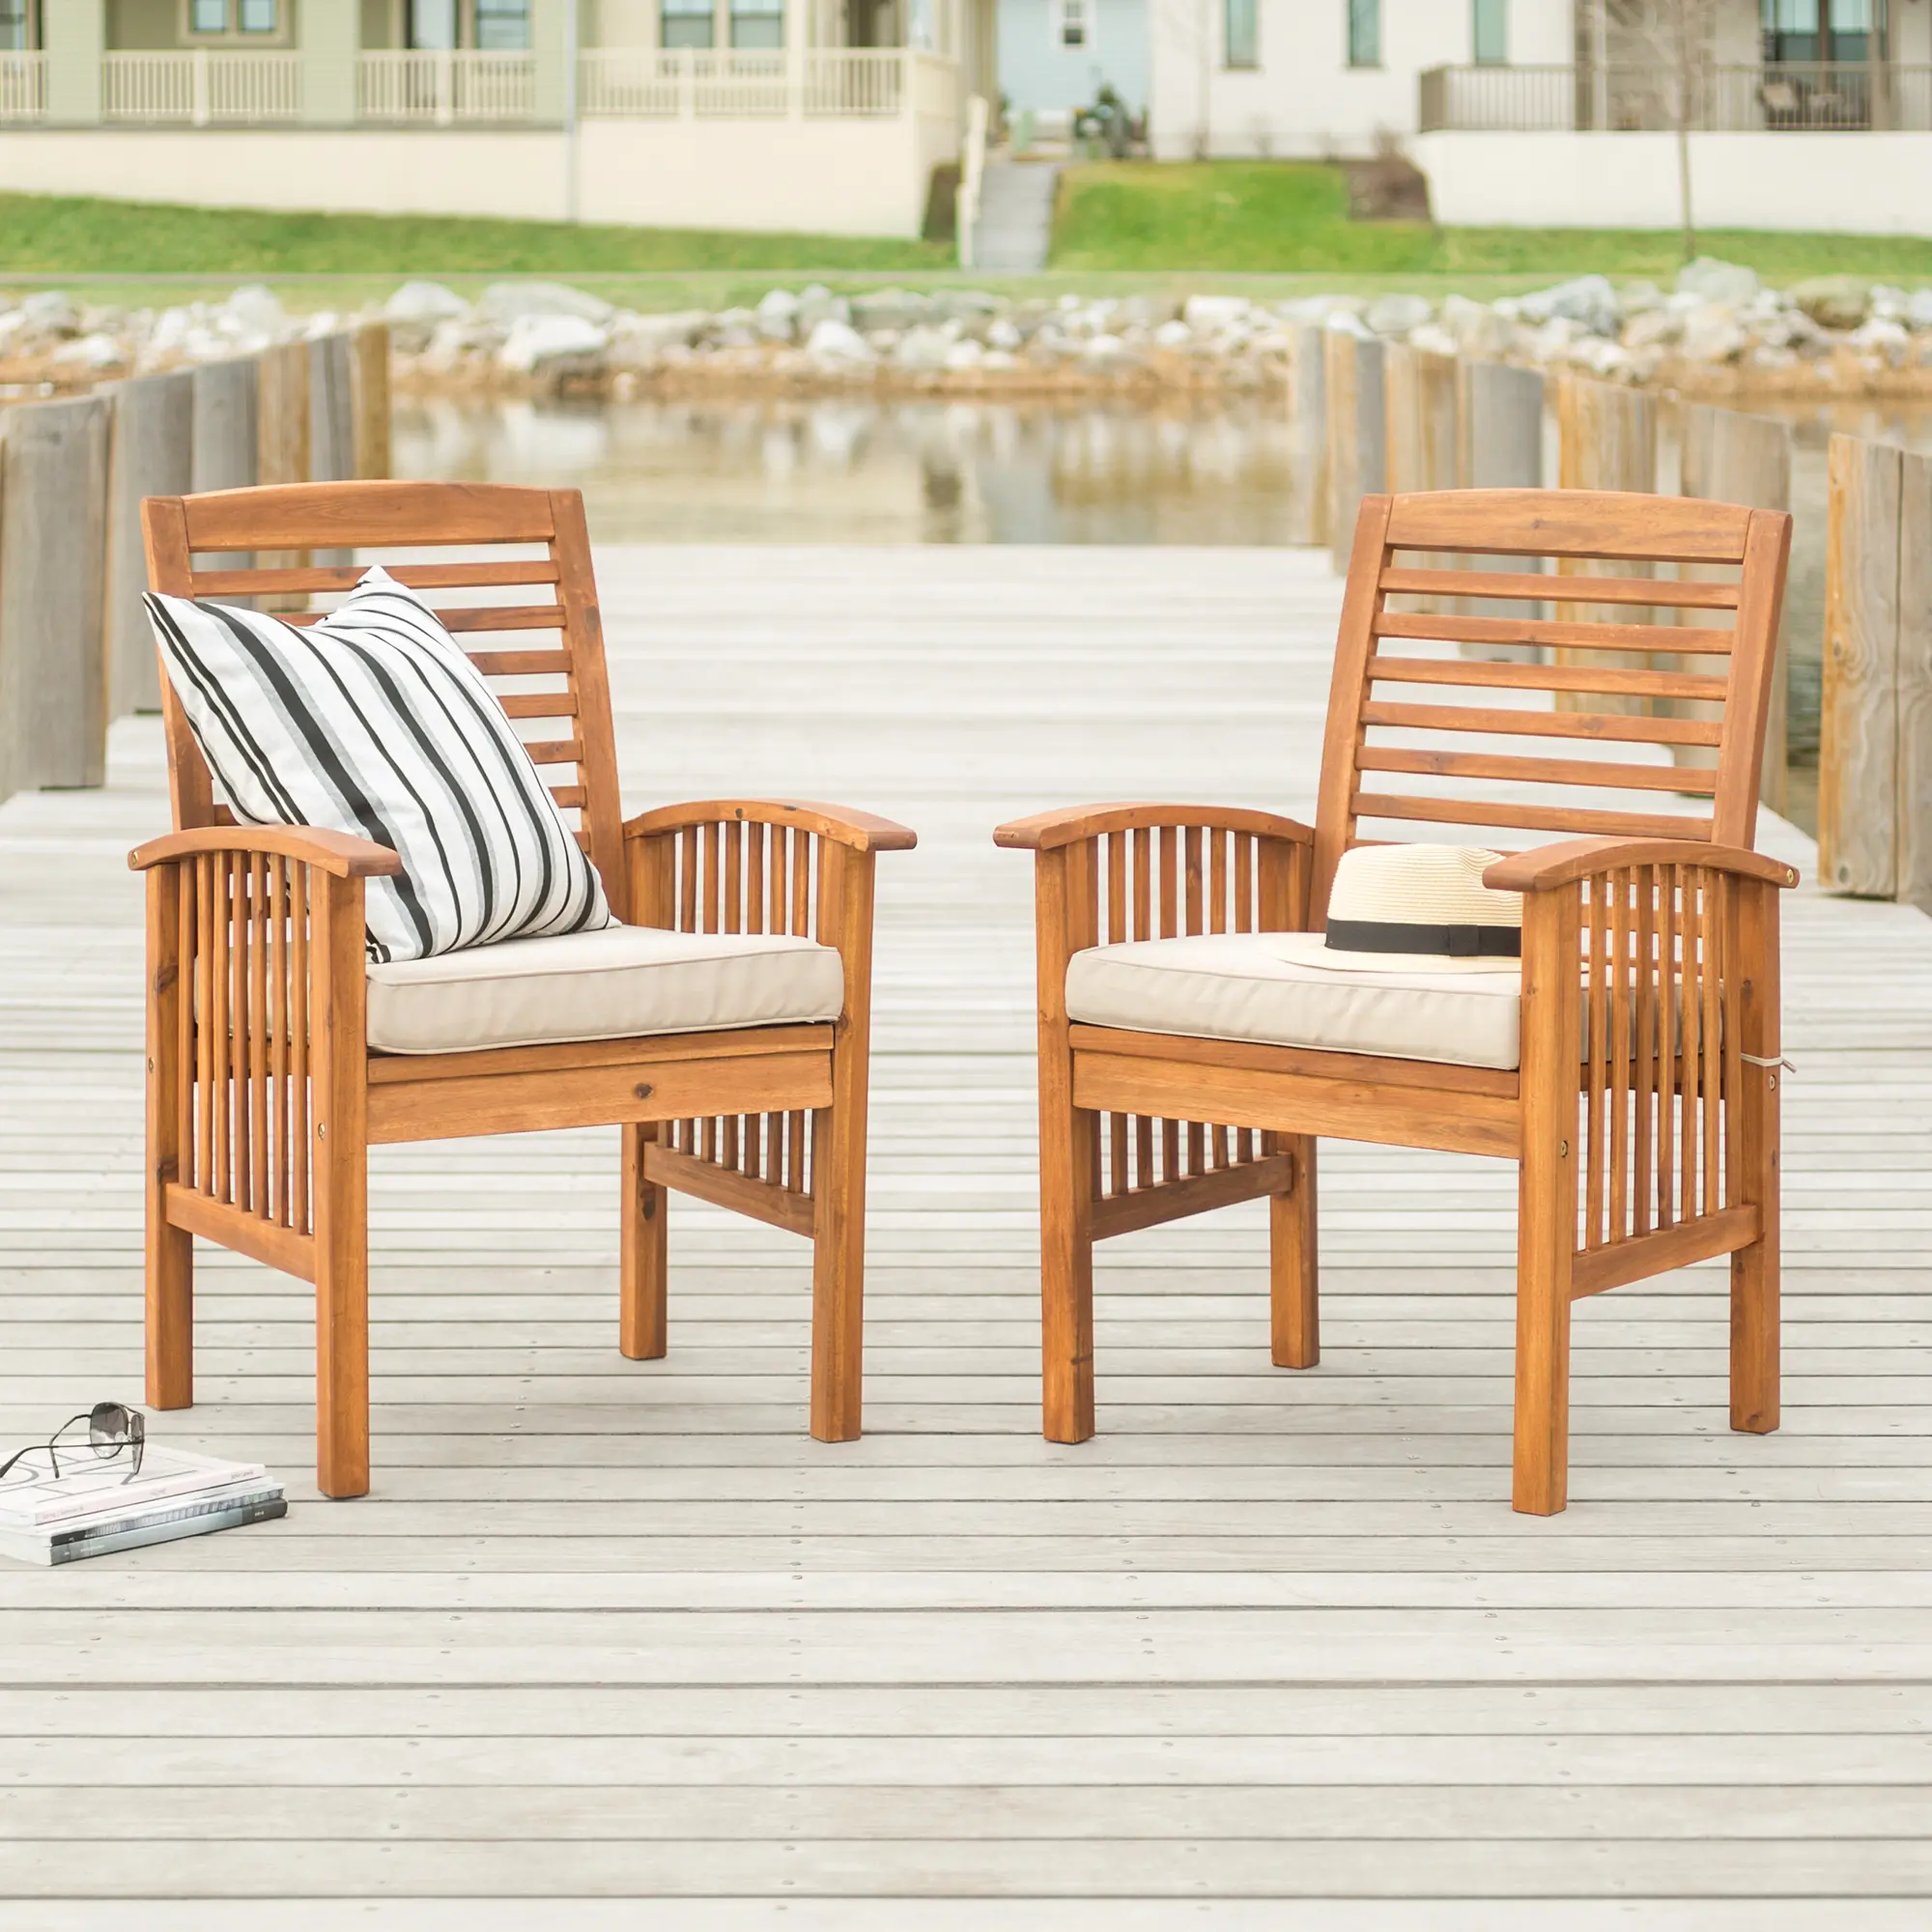 OWC2BR Acacia Wood Outdoor Patio Chairs with Cushions, se sku OWC2BR